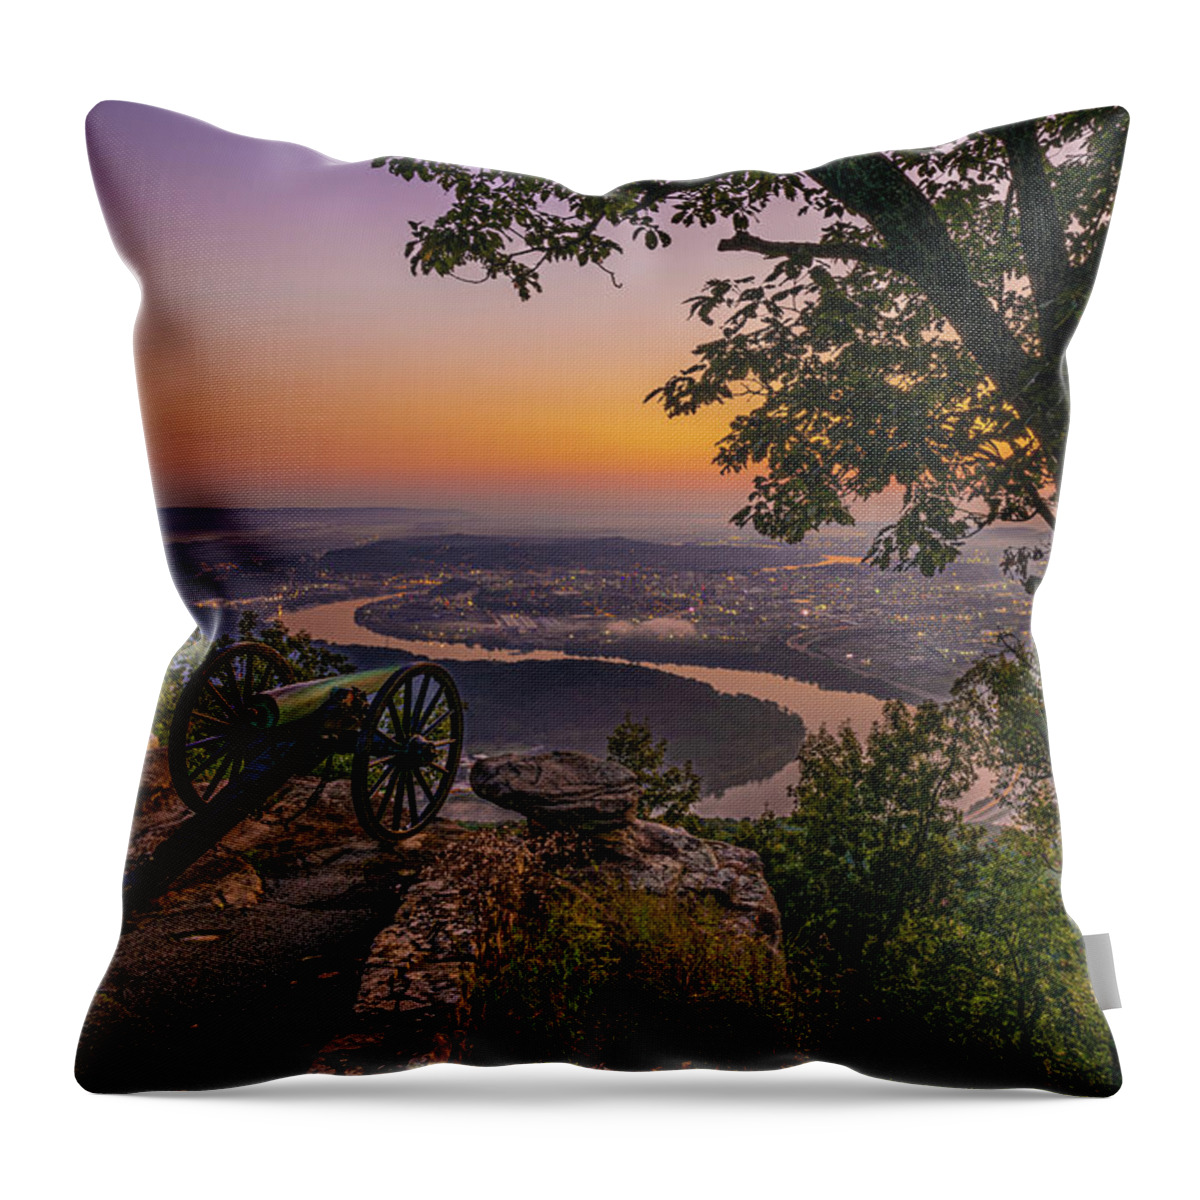 Chattanooga Throw Pillow featuring the photograph Chattanooga Sunrise by Erin K Images